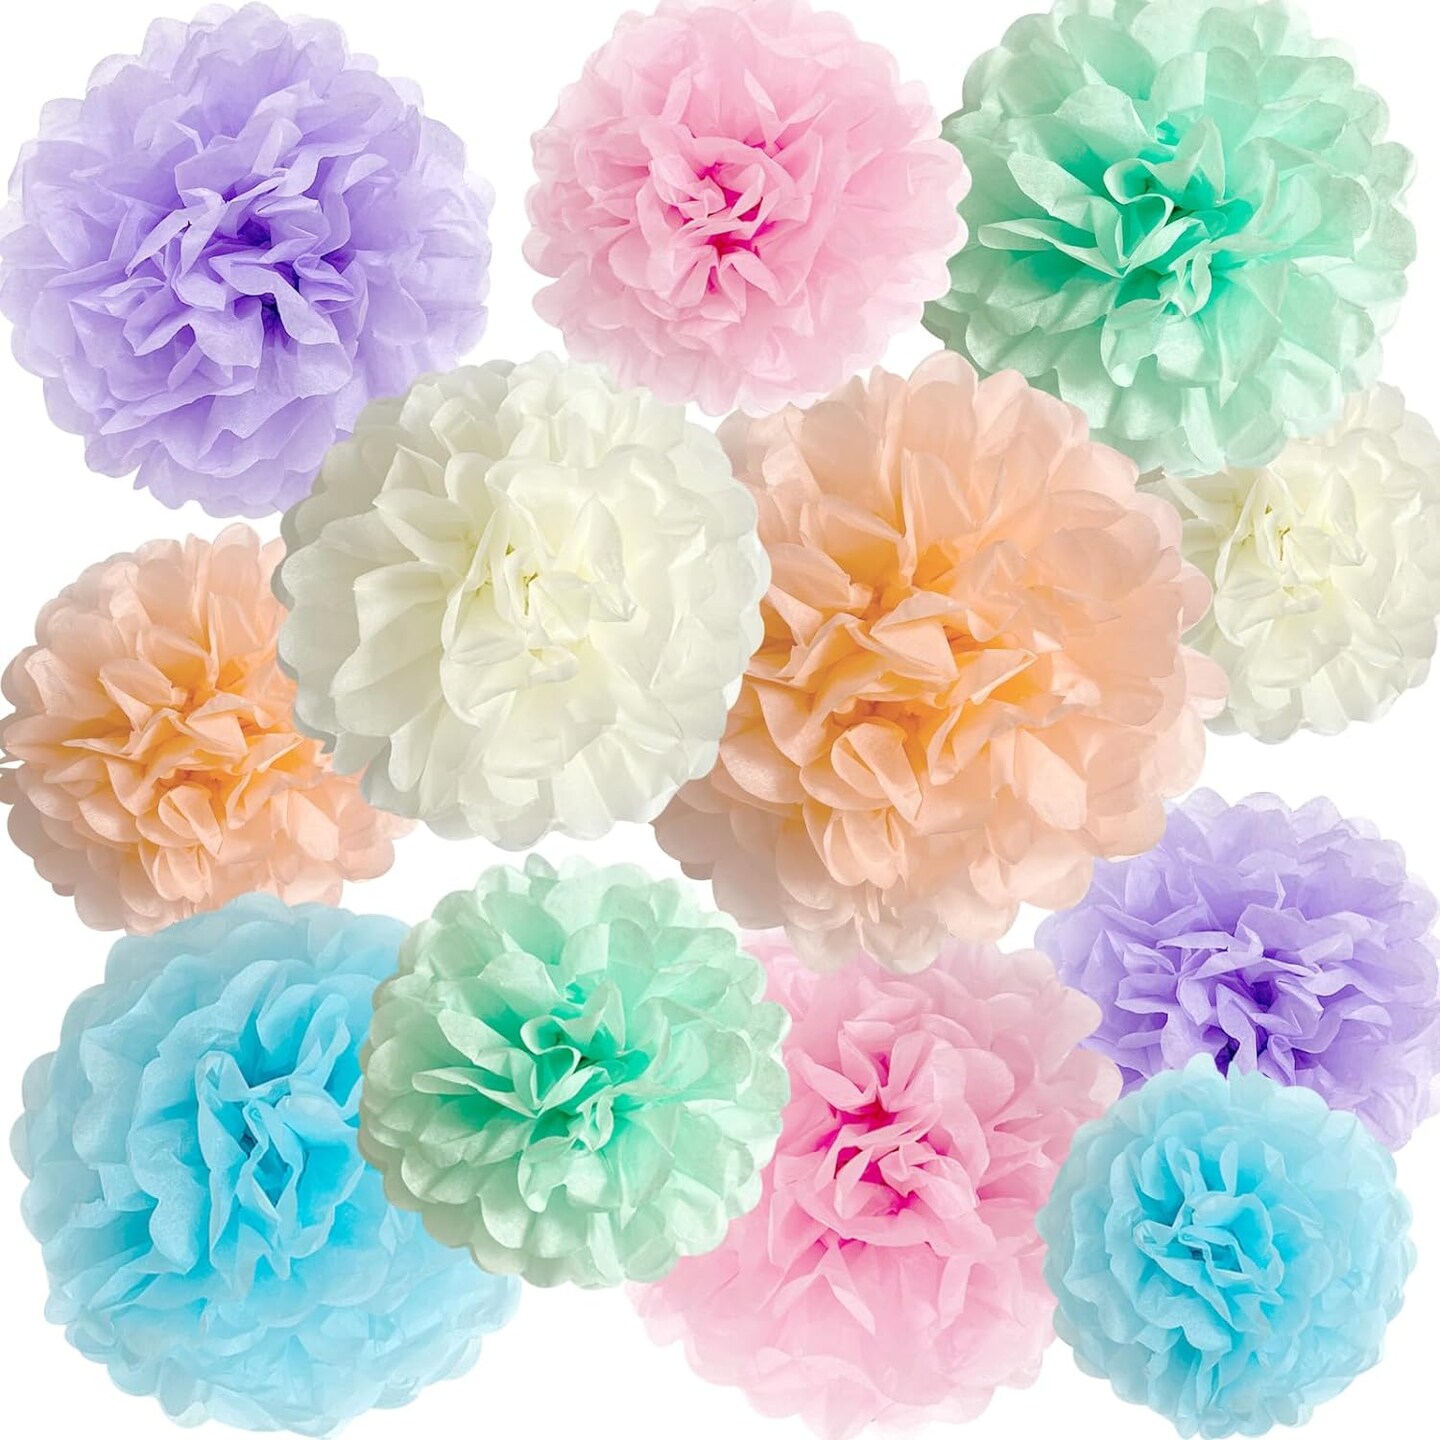 Pastel Tissue Paper Pom Poms Party Decorations Rainbow Ice Cream Easter Macaron Flowers Wall Hanging D&#xE9;cor Supplies Birthday Bridal Baby Shower Colorful Pink Purple Peach Mint Green Blue Ivory